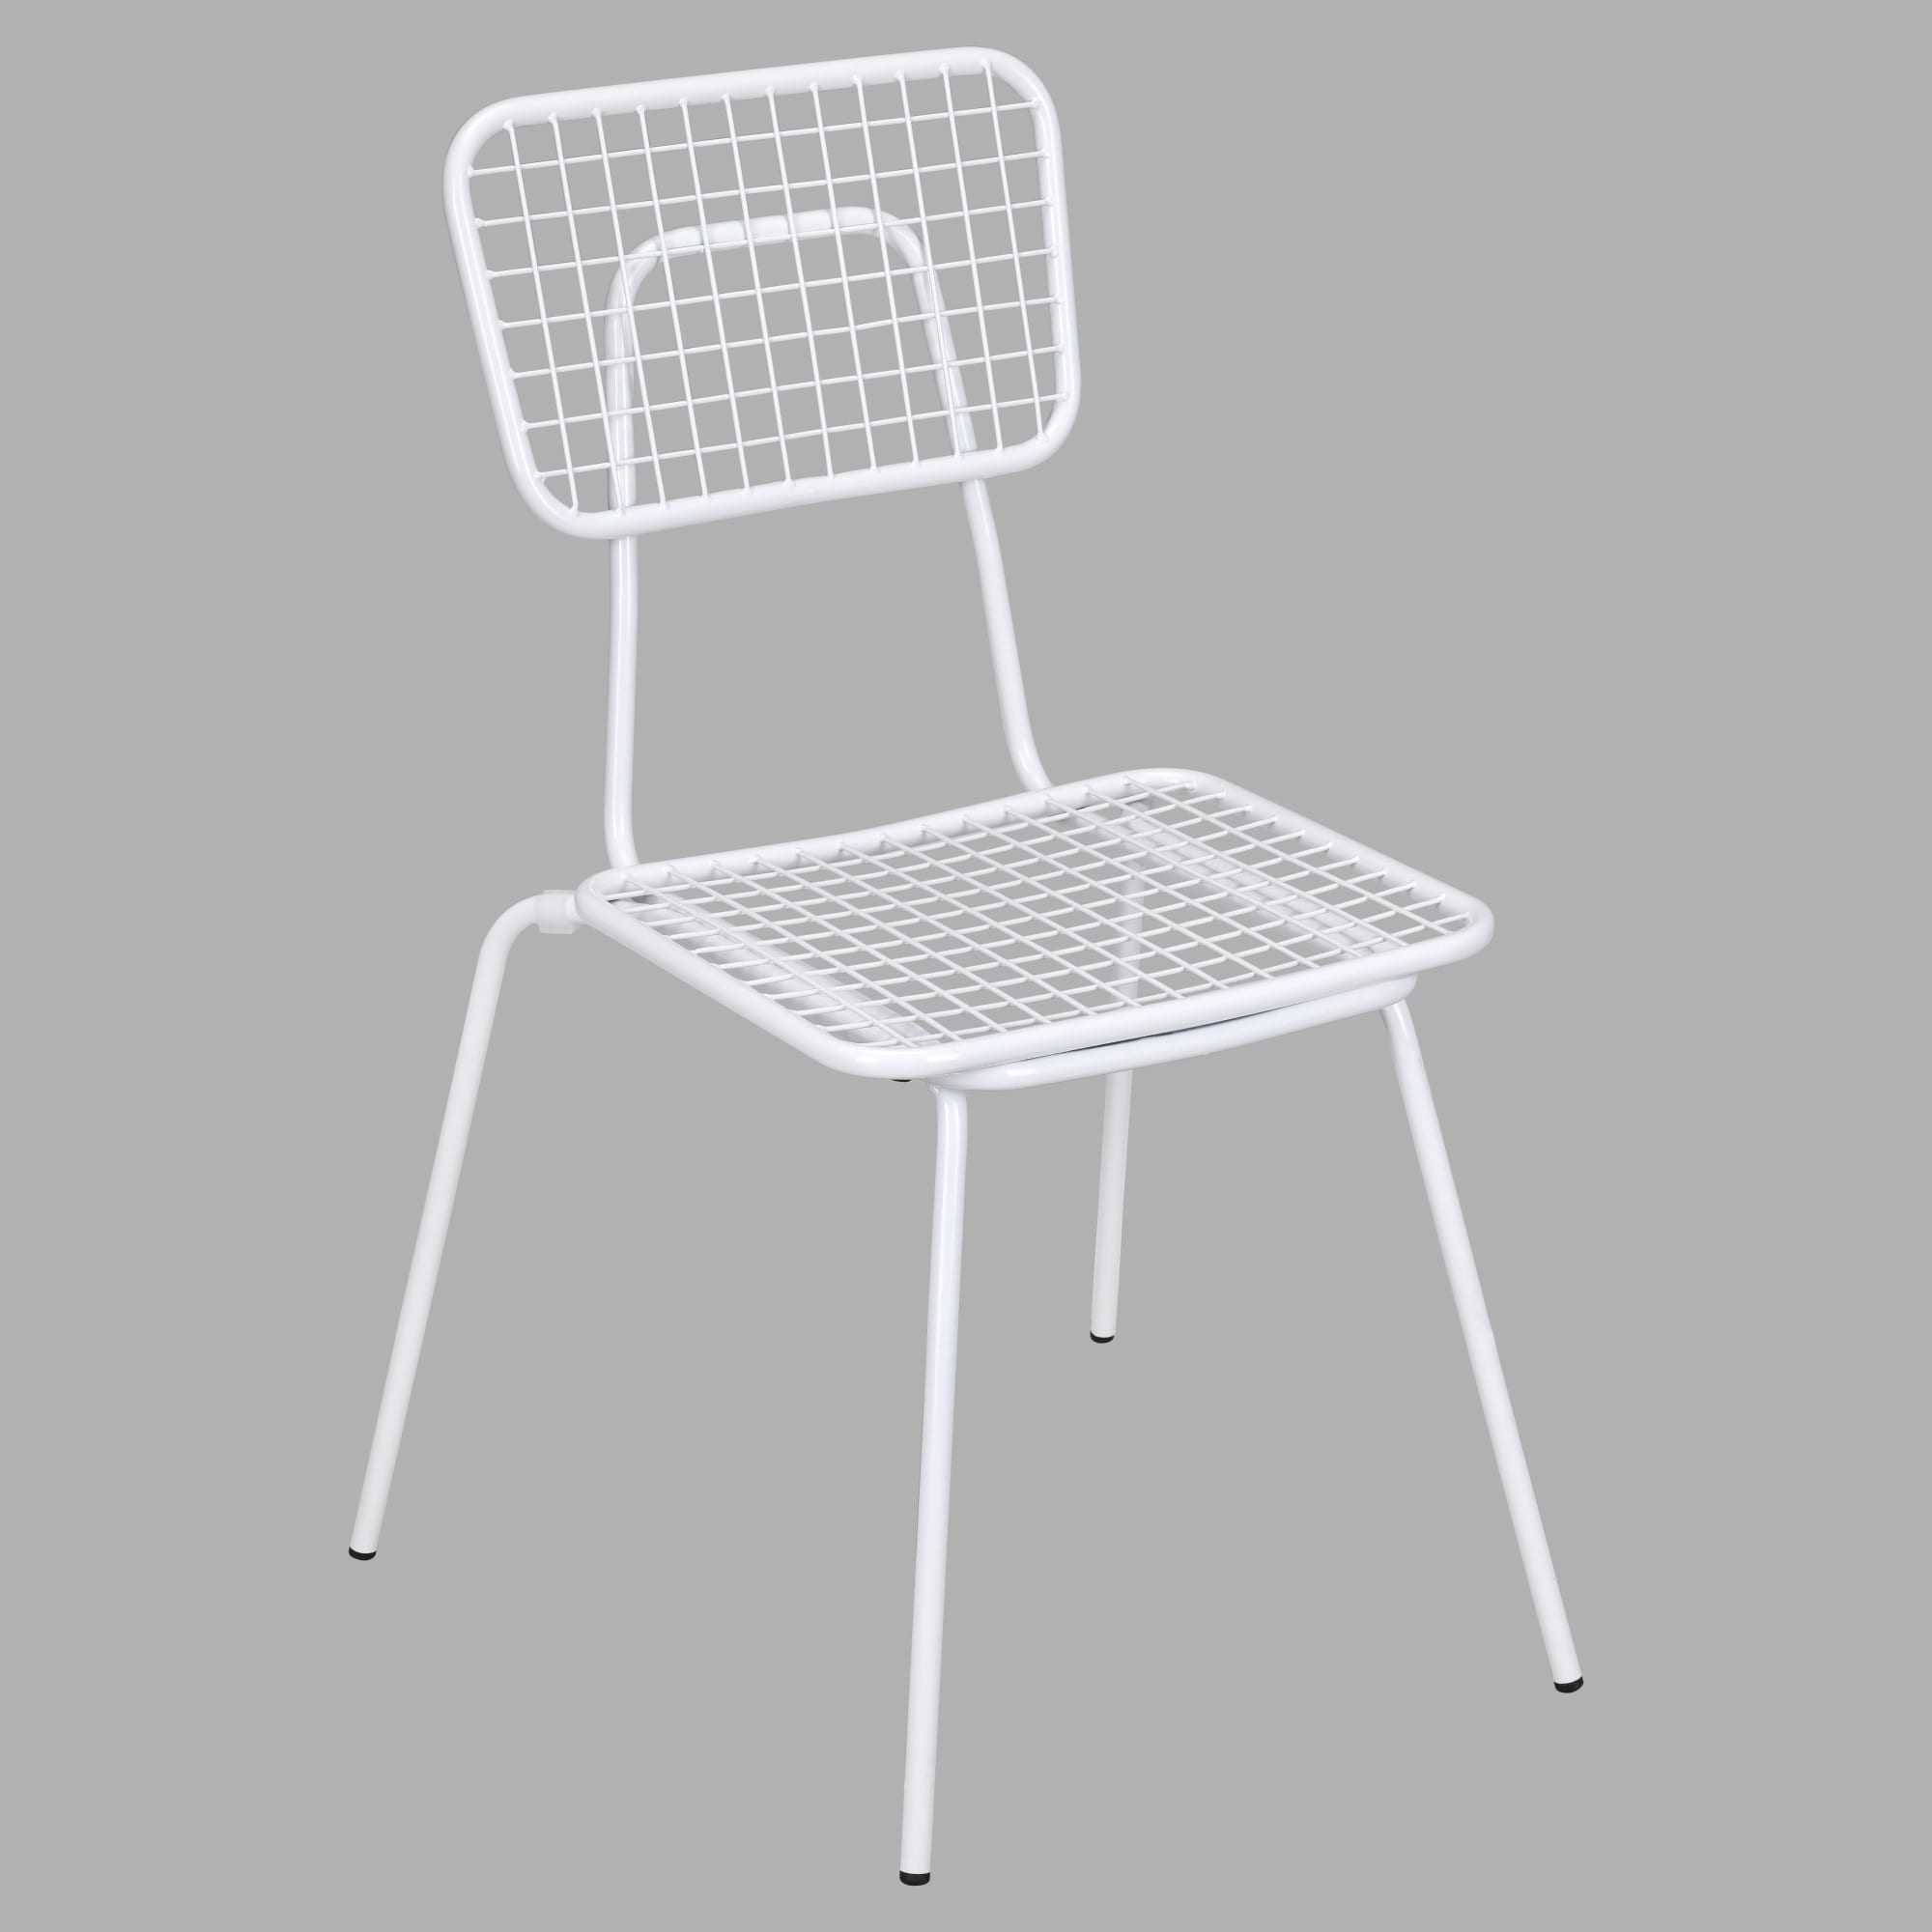 Ollie Patio Chair in White Finish